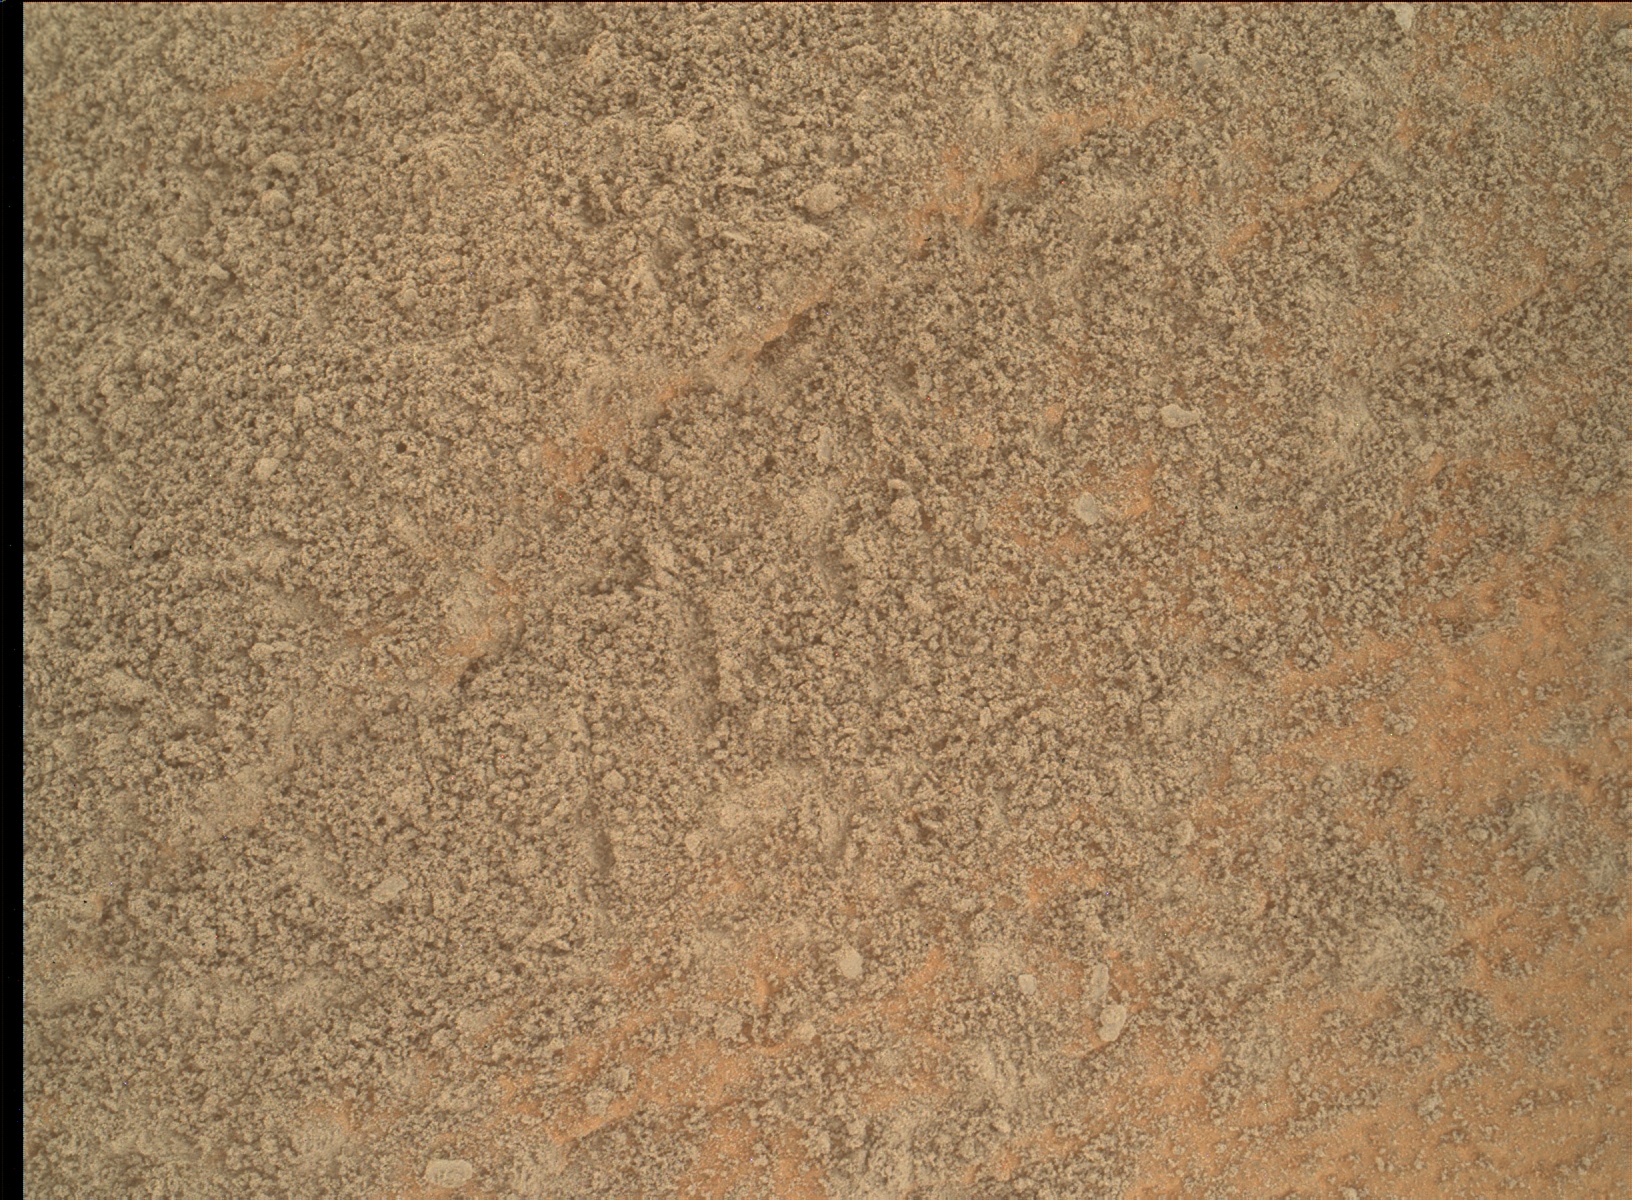 Nasa's Mars rover Curiosity acquired this image using its Mars Hand Lens Imager (MAHLI) on Sol 2729